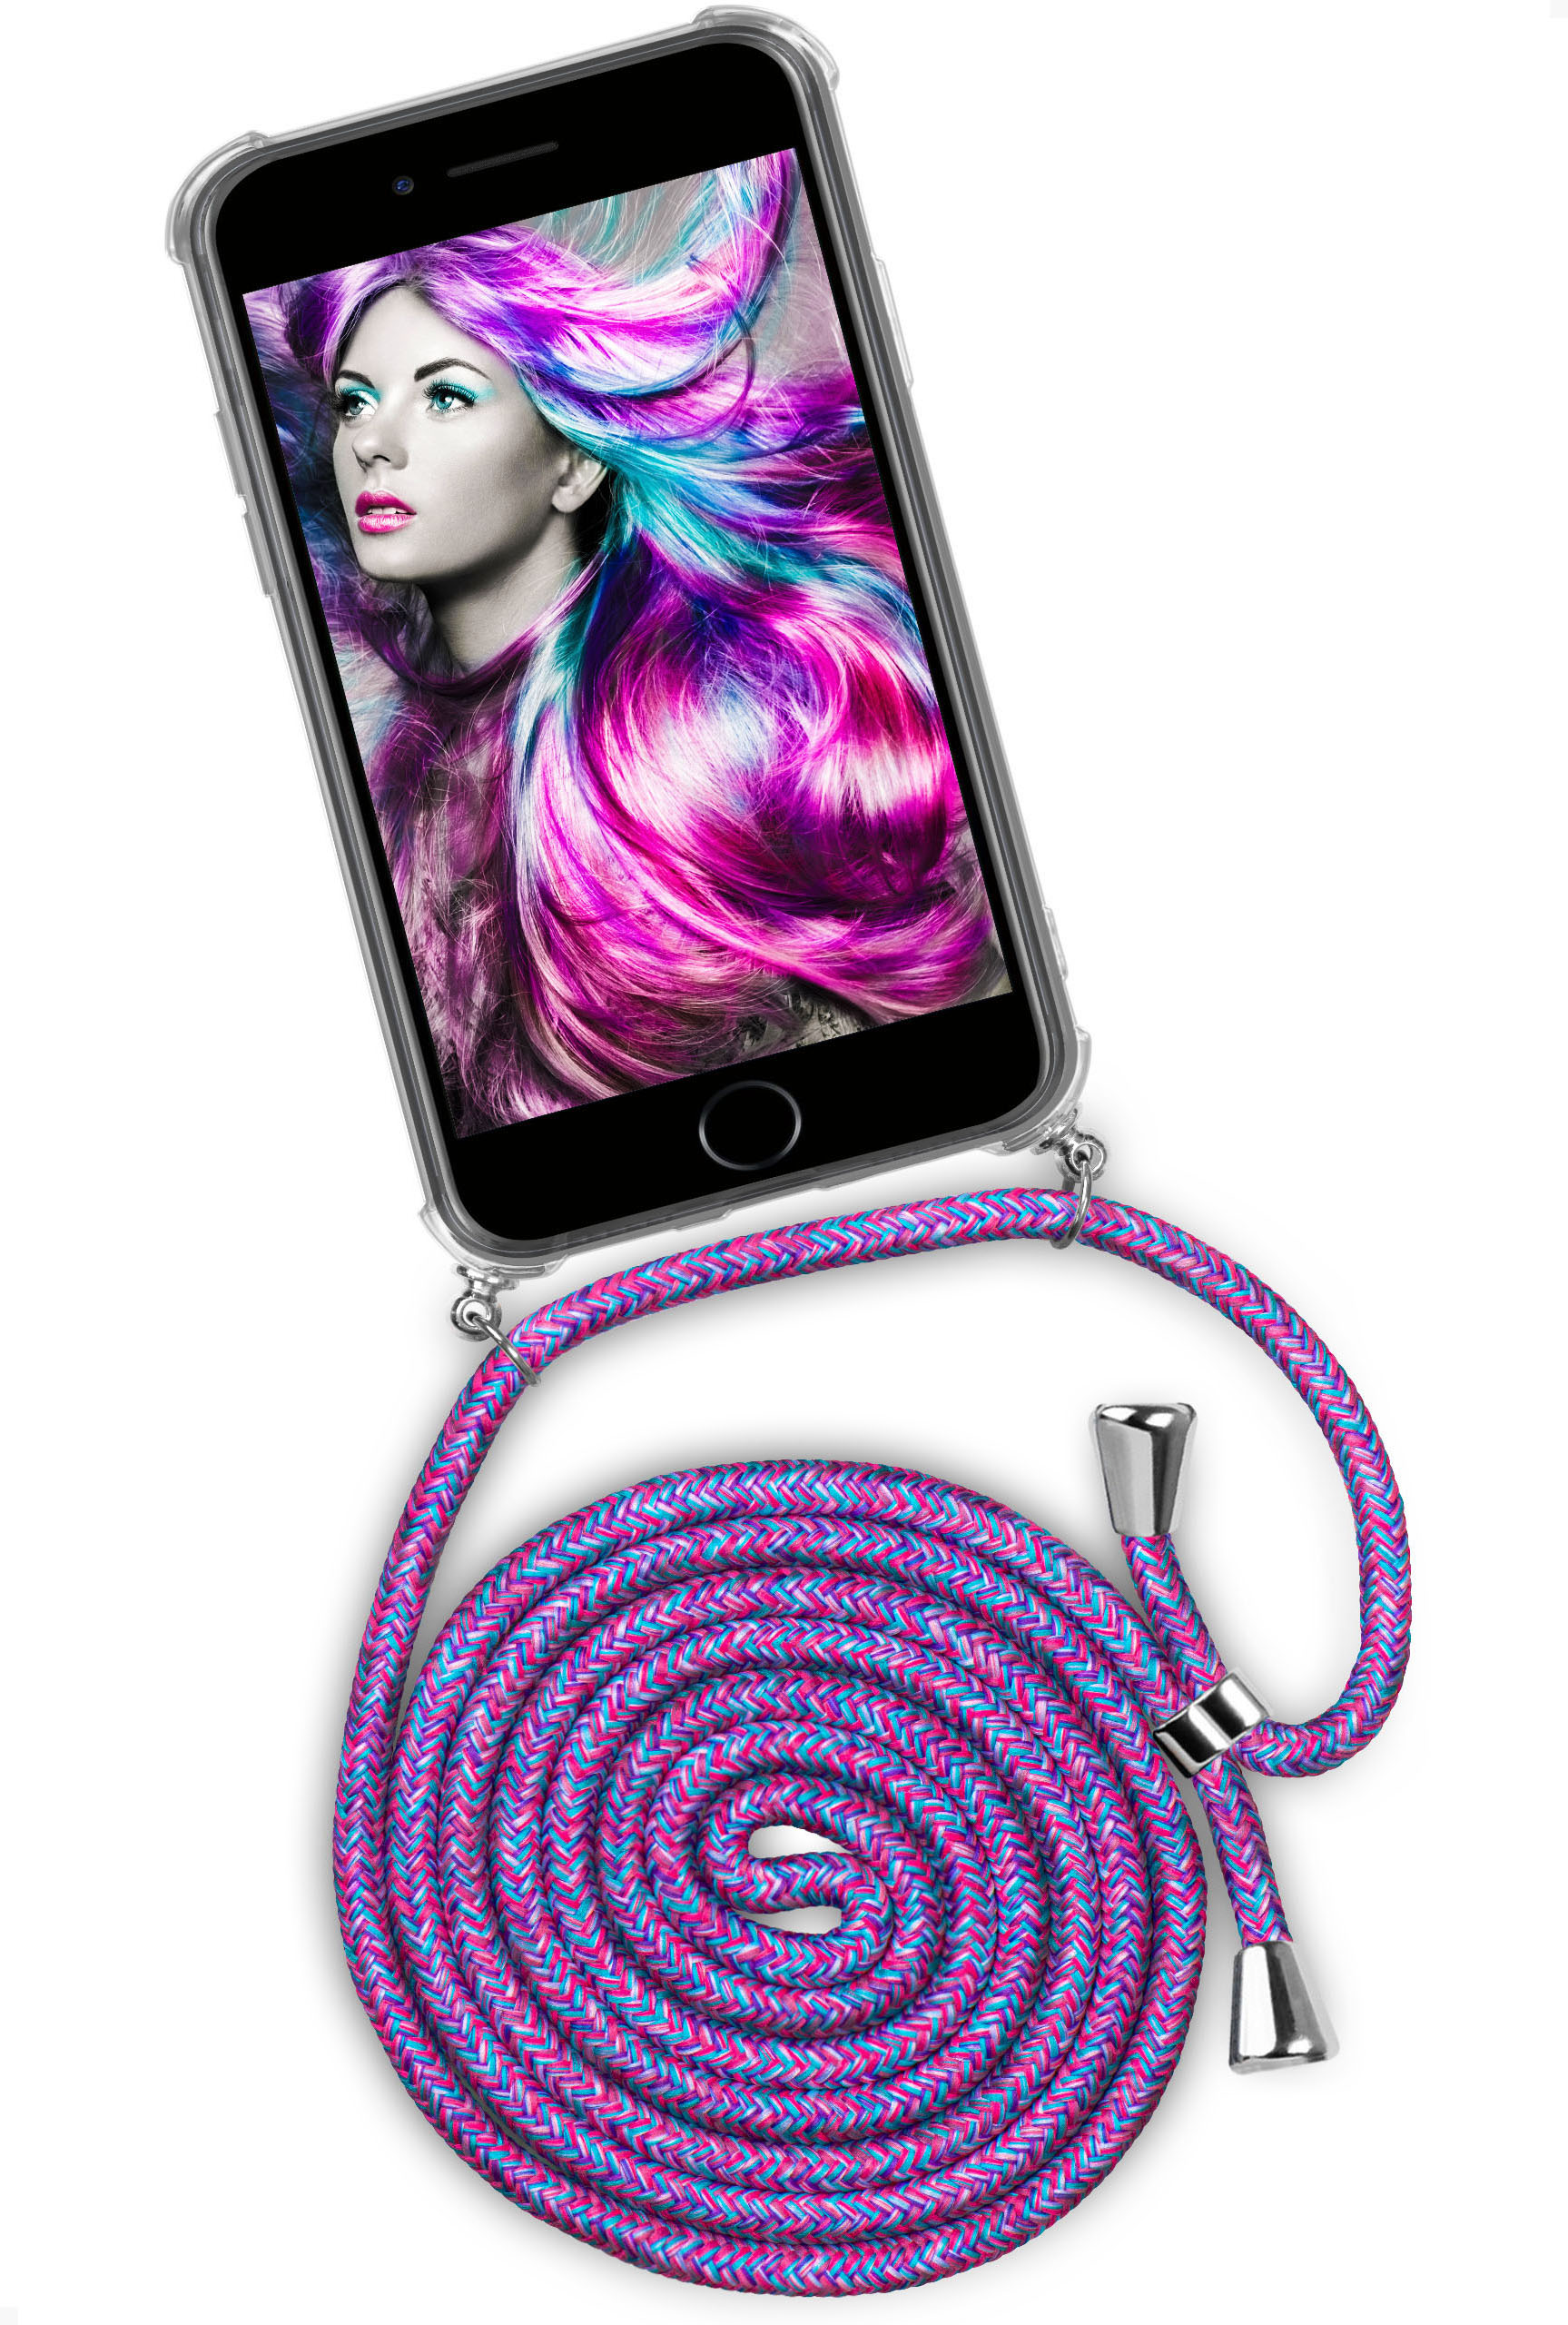 Twist / 8, ONEFLOW Apple, Unicorn 7 (Silber) Case, Crazy iPhone Backcover, iPhone